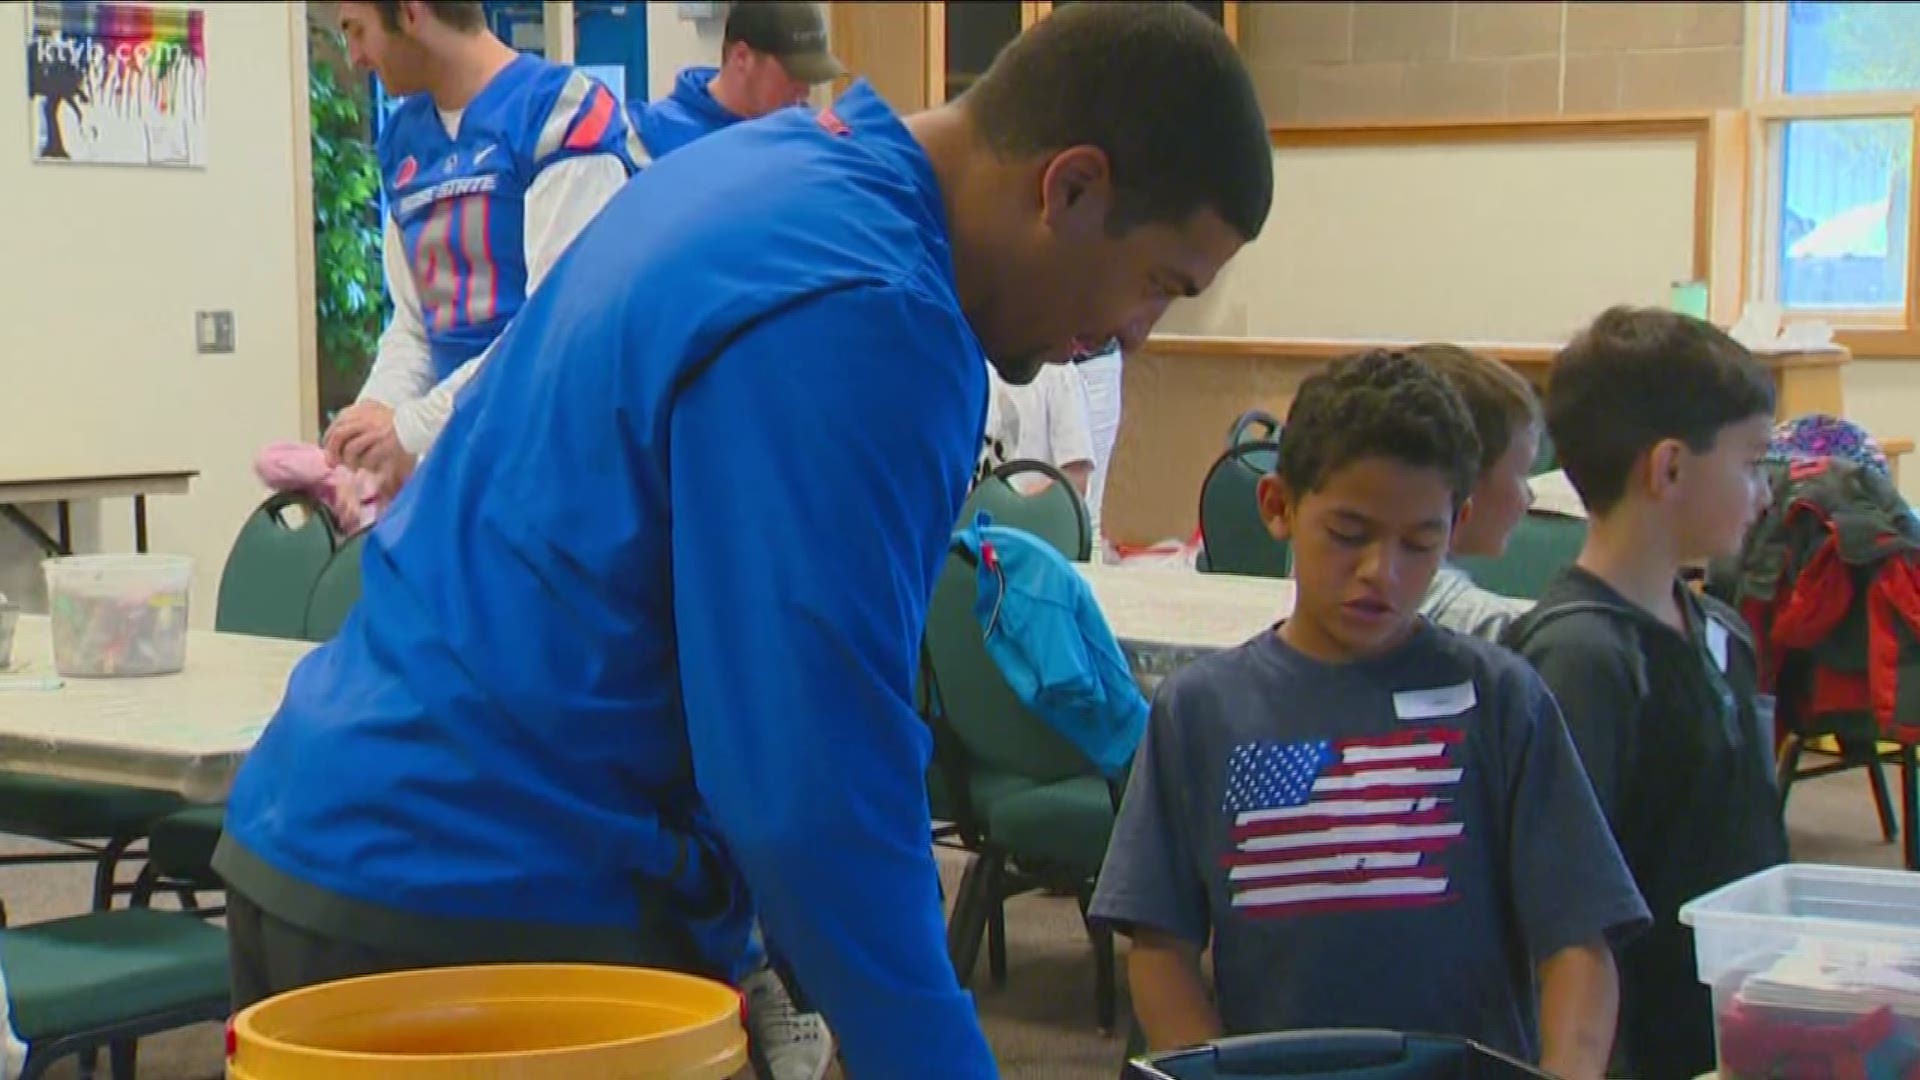 Some Boise State football players helped spread an important message Monday about anti-bullying.